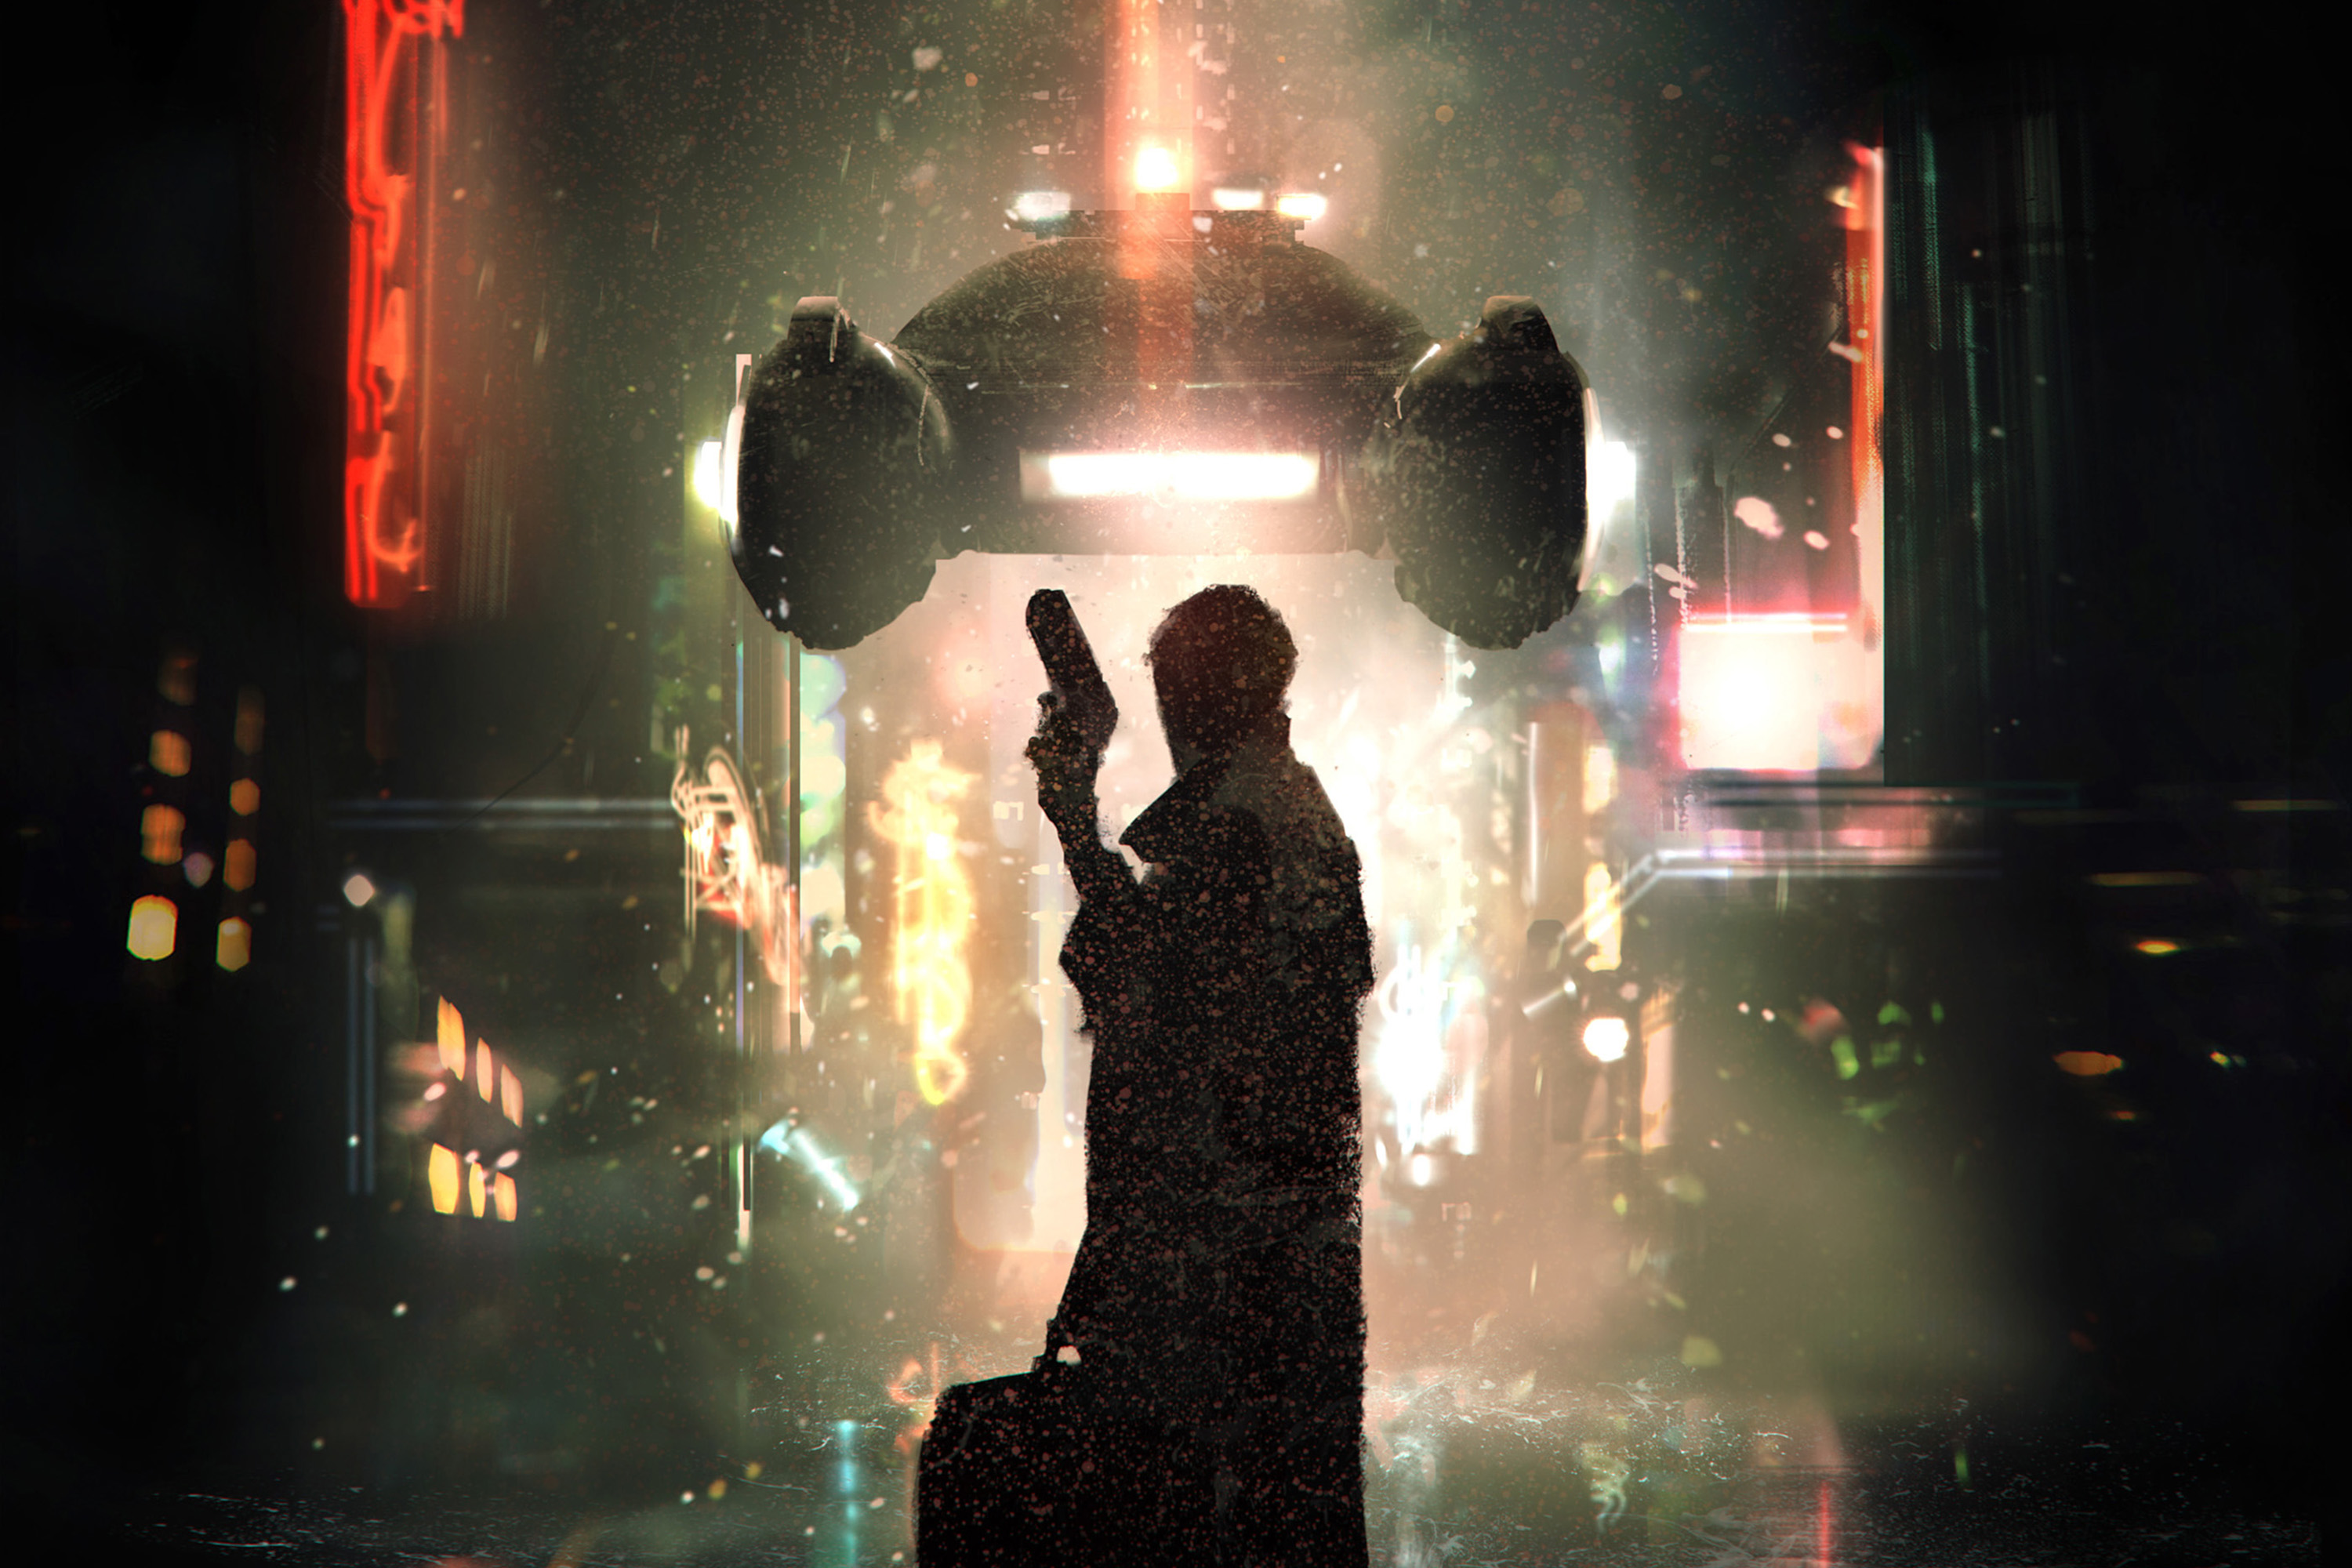 A blade runner holding a gun and a bag stares down a flying car in a rain-soaked, neon-lit scene from near-future LA.